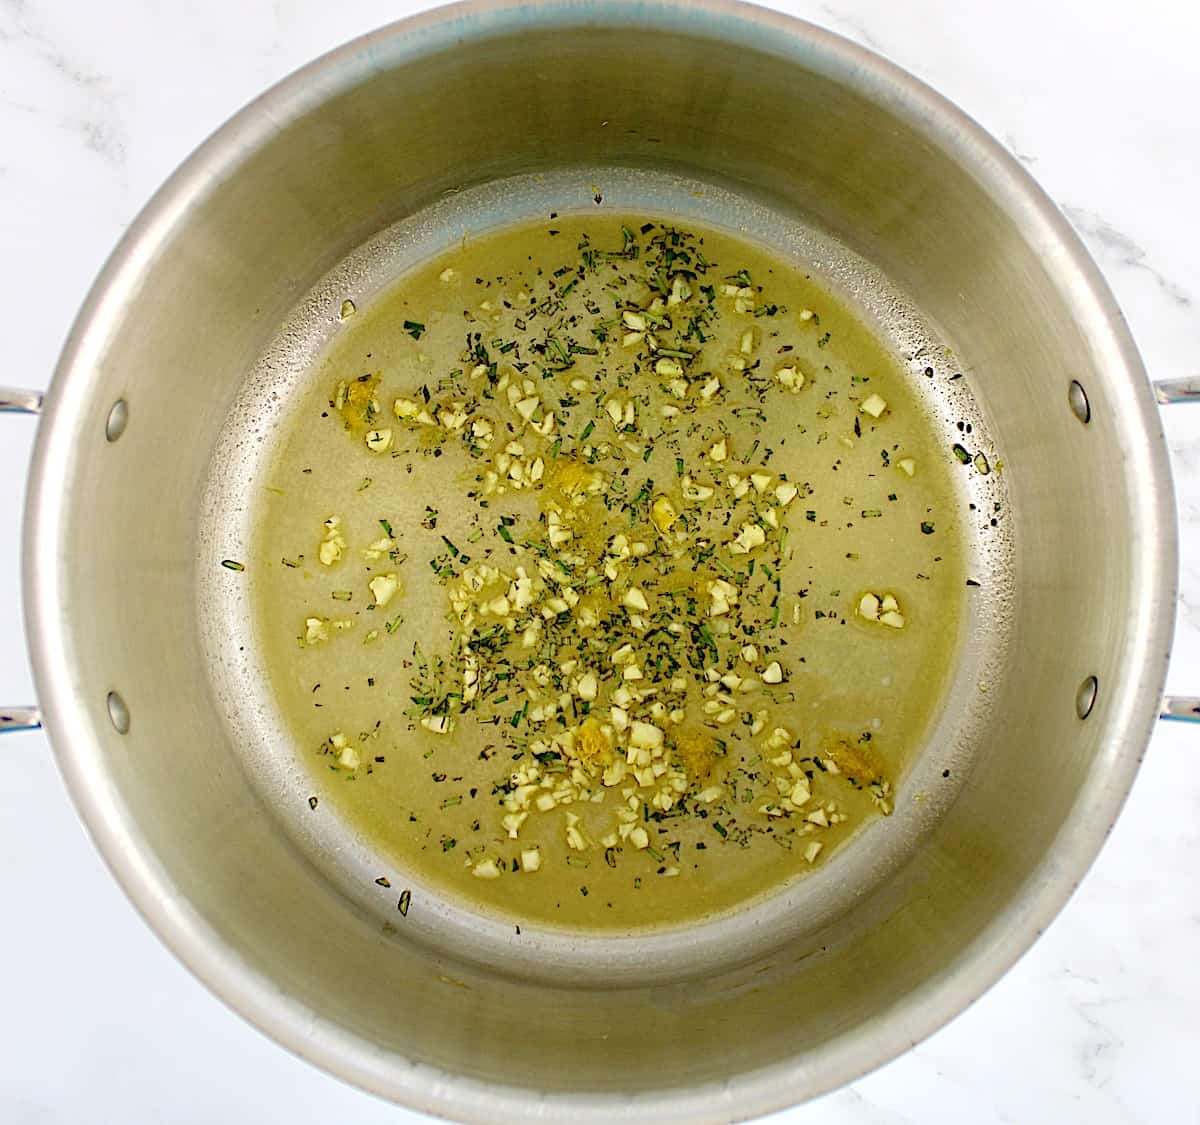 melted butter, garlic, rosemary and lemon zest in saucepan